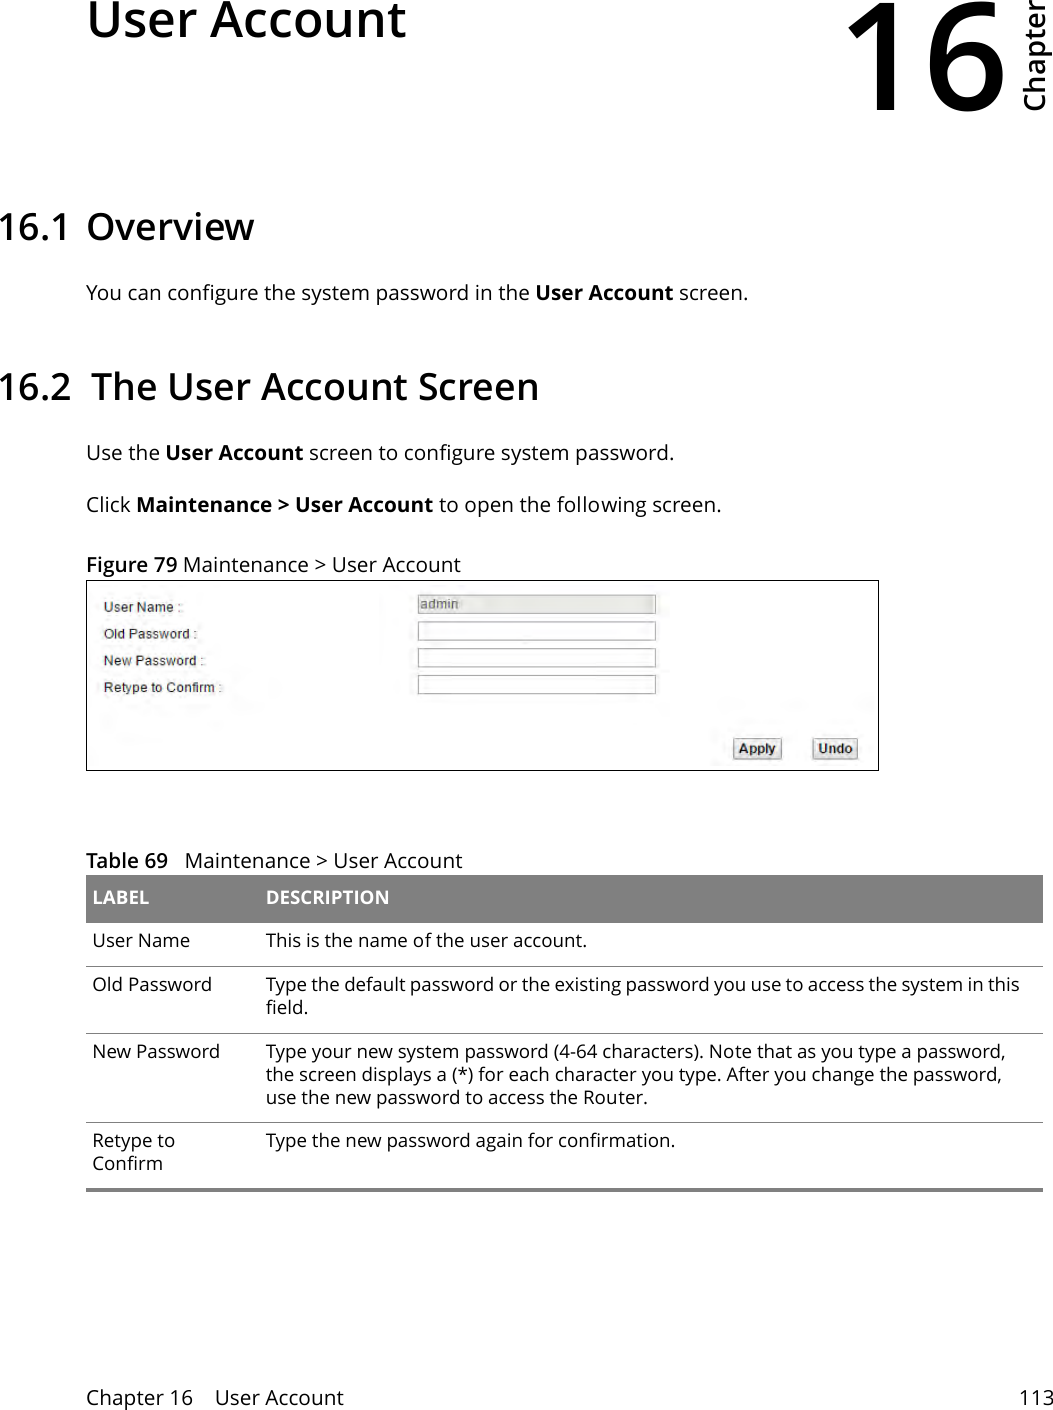 16Chapter Chapter 16    User Account 113CHAPTER 16 Chapter 16 User Account16.1 Overview You can configure the system password in the User Account screen.16.2  The User Account ScreenUse the User Account screen to configure system password.Click Maintenance &gt; User Account to open the following screen. Figure 79 Maintenance &gt; User Account Table 69   Maintenance &gt; User Account LABEL DESCRIPTIONUser Name This is the name of the user account.Old Password Type the default password or the existing password you use to access the system in this field.New Password Type your new system password (4-64 characters). Note that as you type a password, the screen displays a (*) for each character you type. After you change the password, use the new password to access the Router.Retype to ConfirmType the new password again for confirmation.